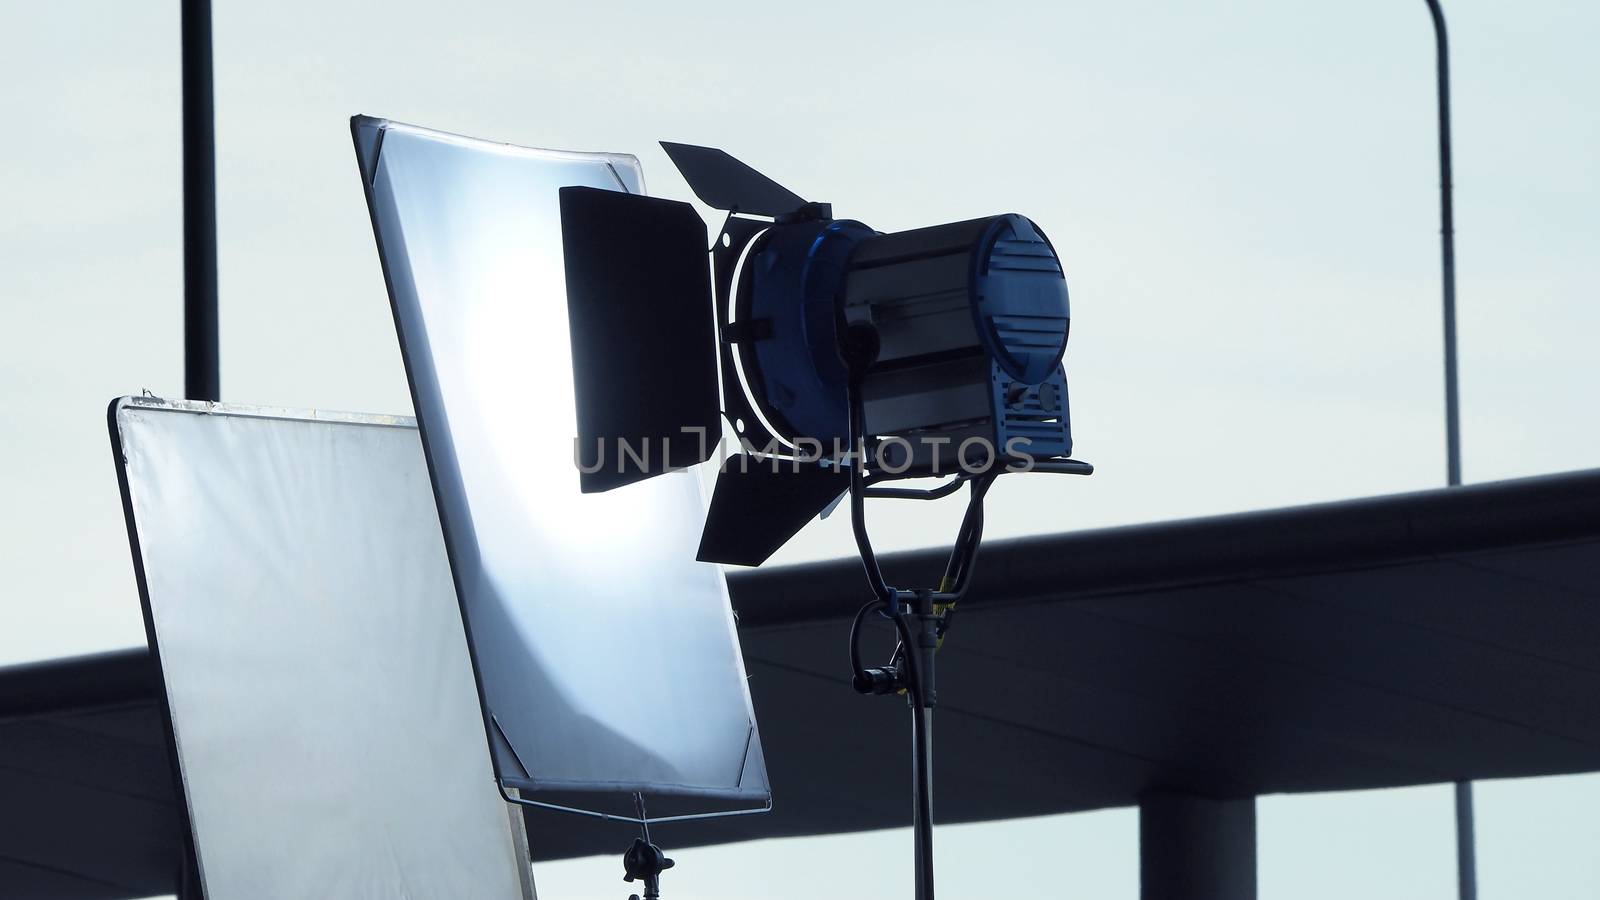 Big LED spotlight and tripod equipment for video or movie production at outdoor location.